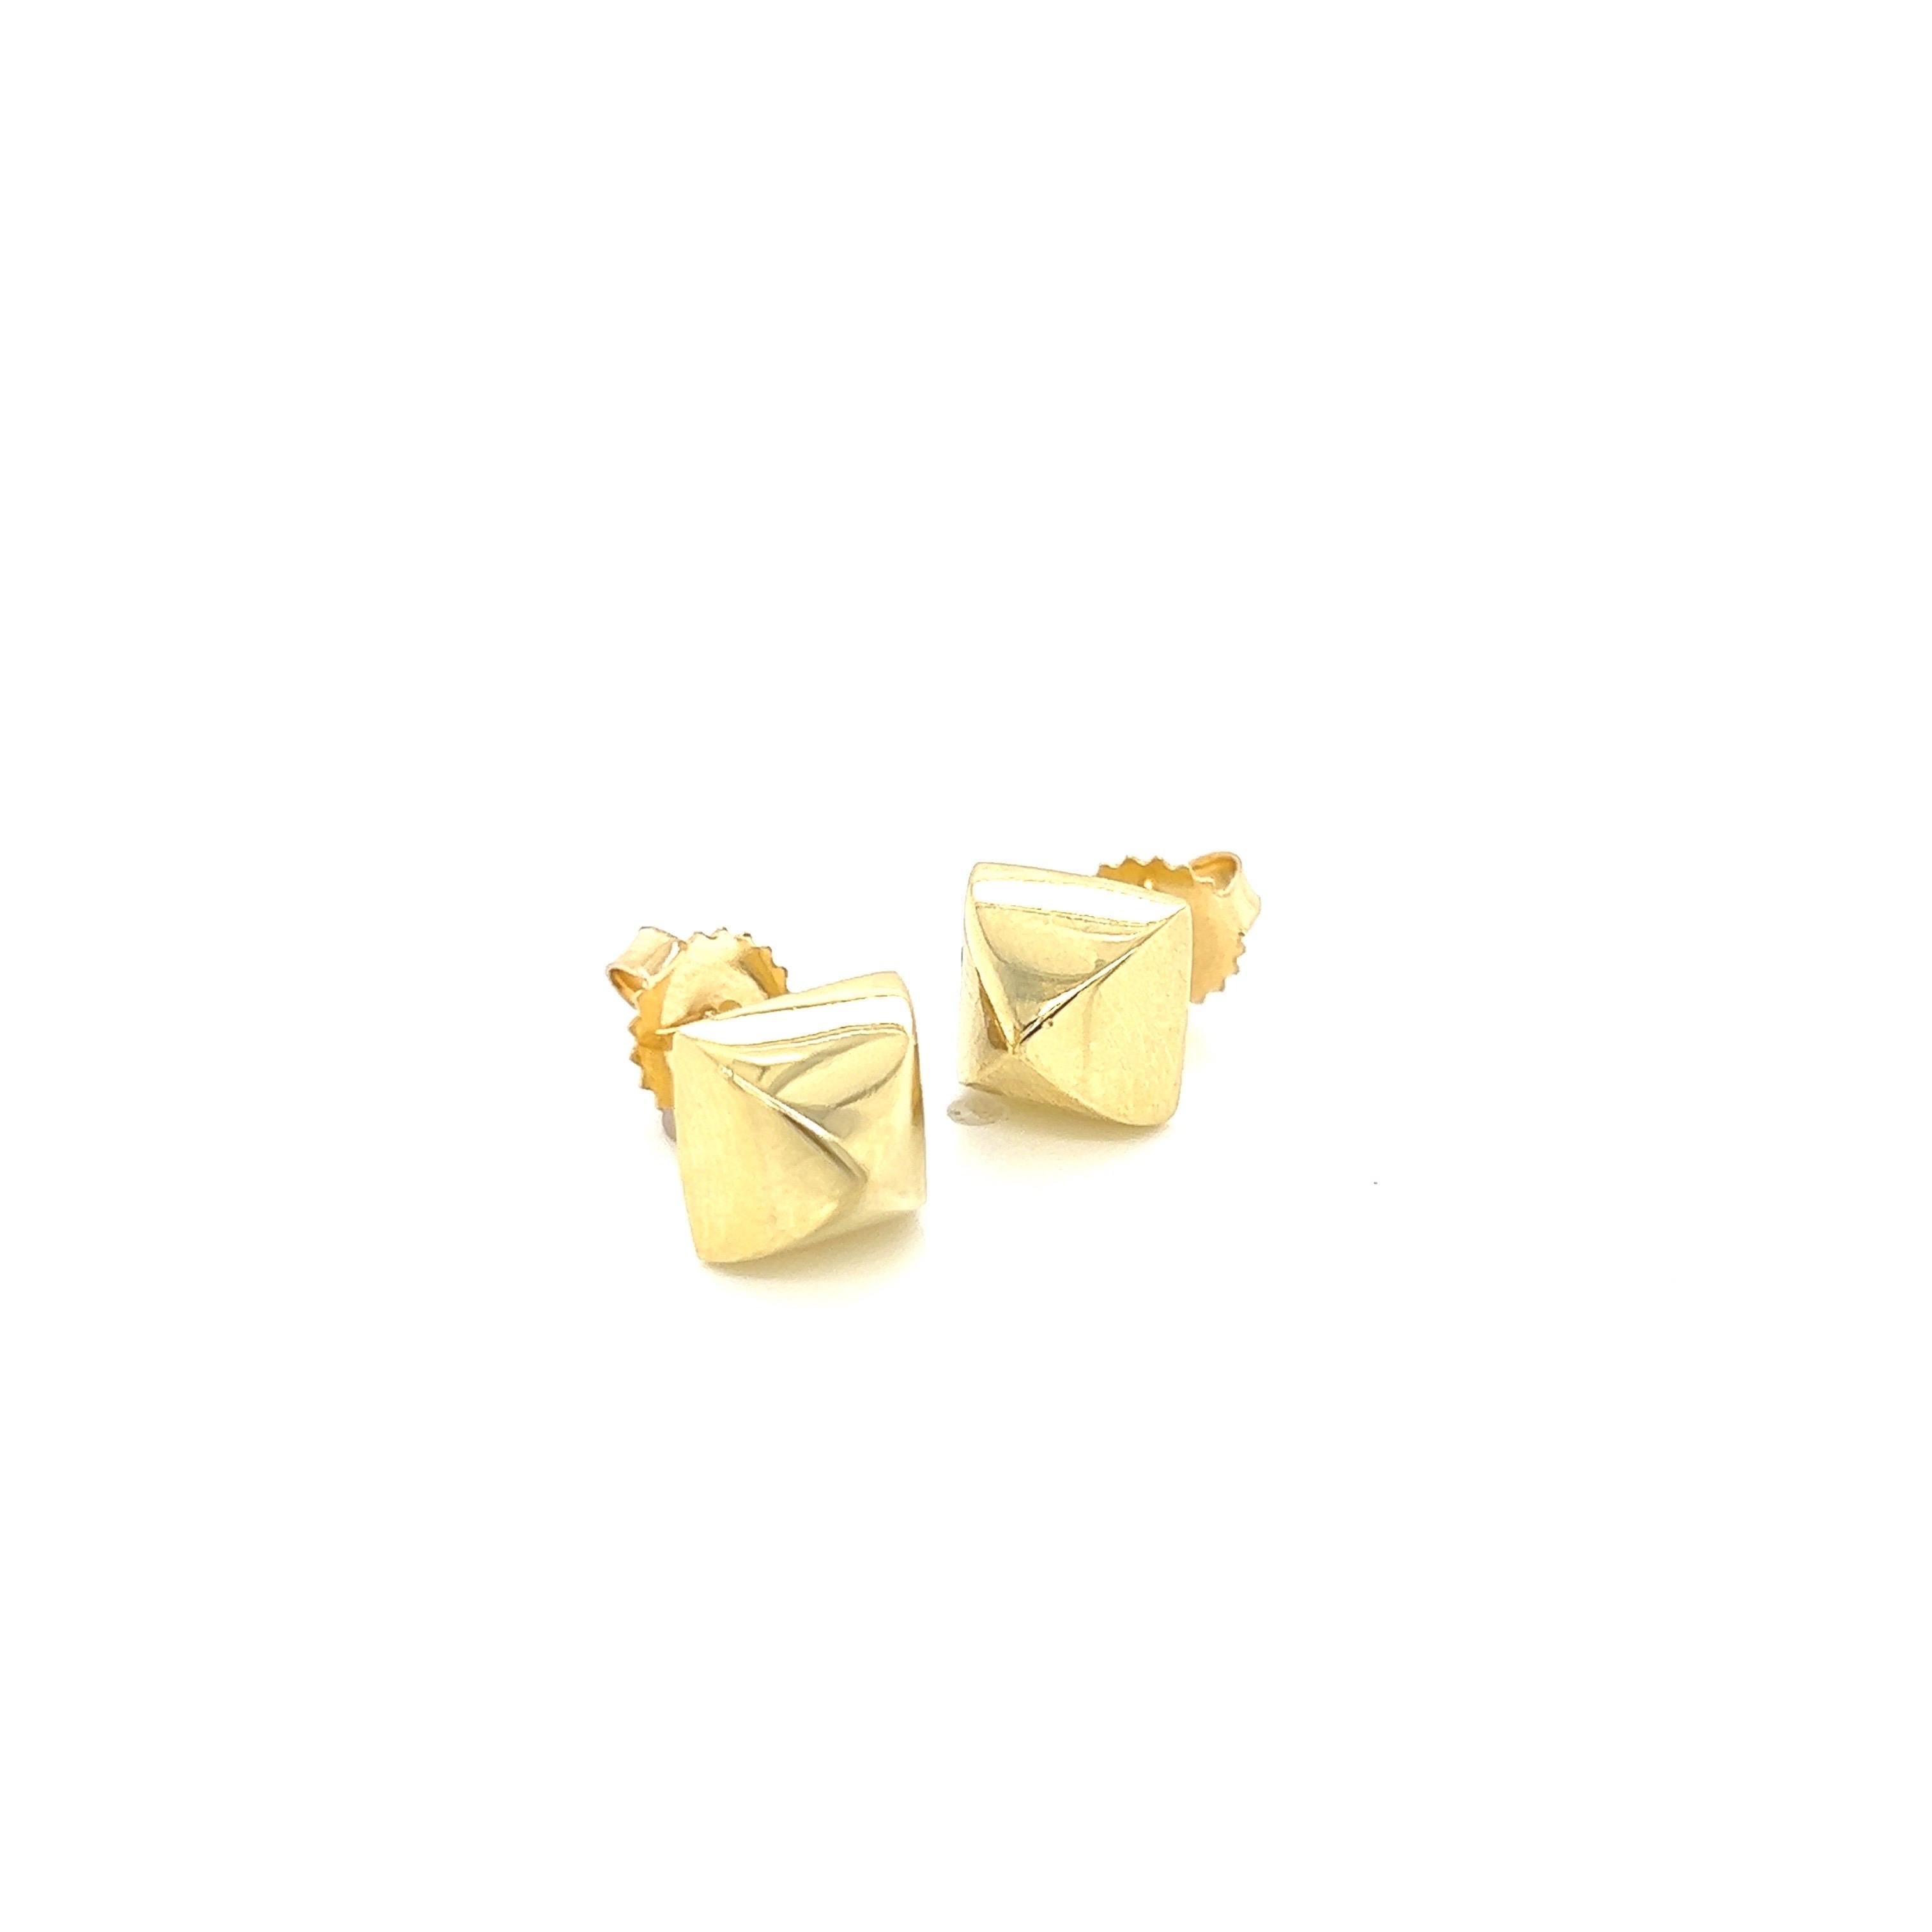 18k Yellow Gold Studded Stud Earrings 
Come with 18k gold earring backs.

Measures approximately 8.5mm x 8.5mm
Weight approx. 4.7 DWT